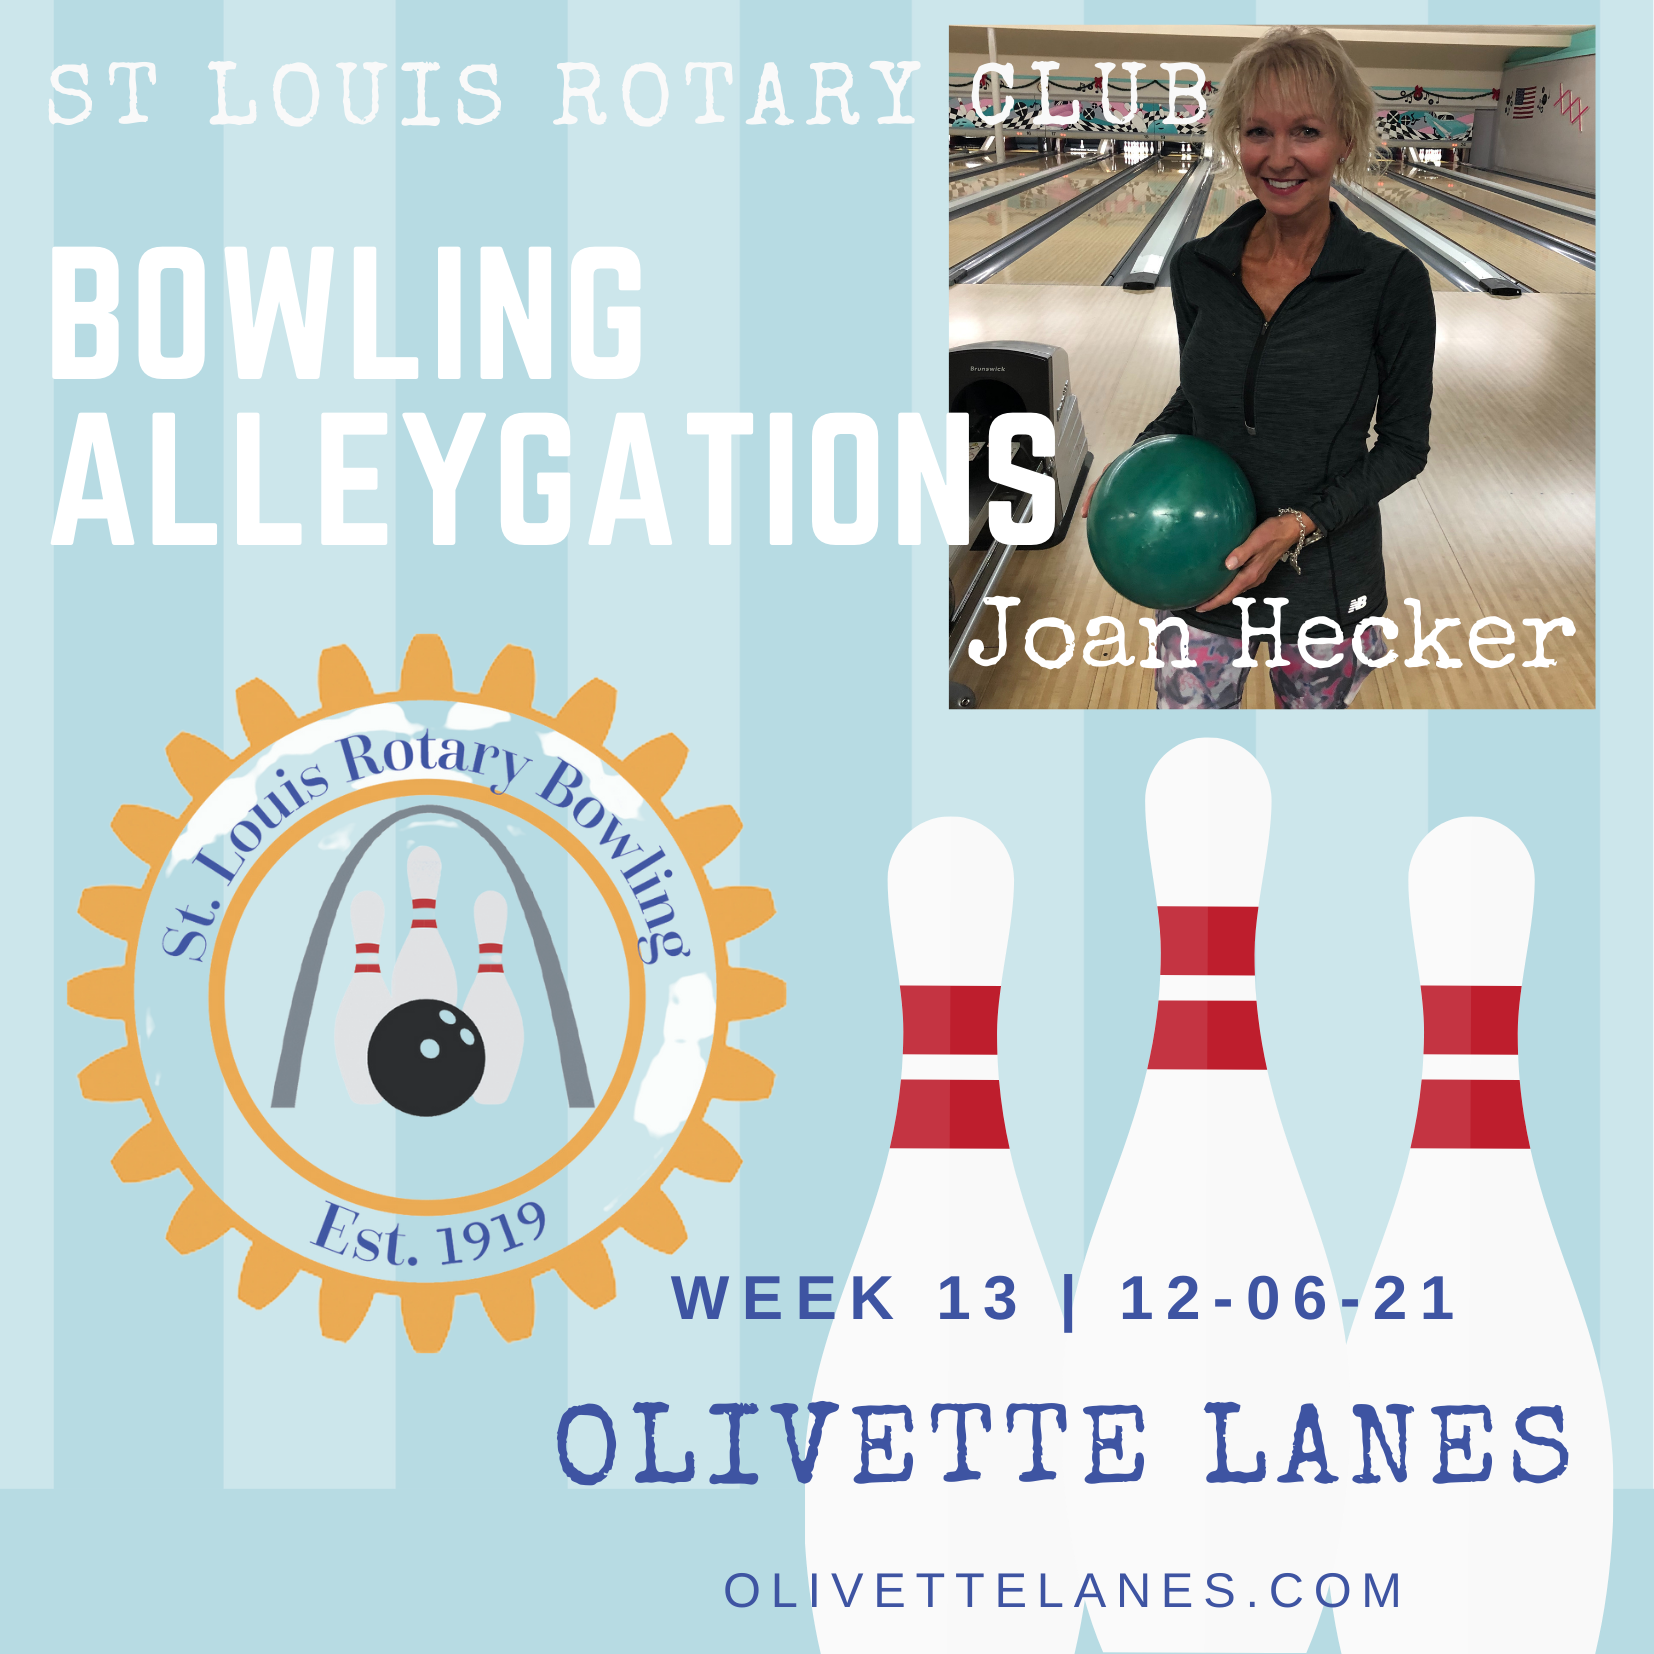 Bowling Alleygations Week 13 _ 12-06-21